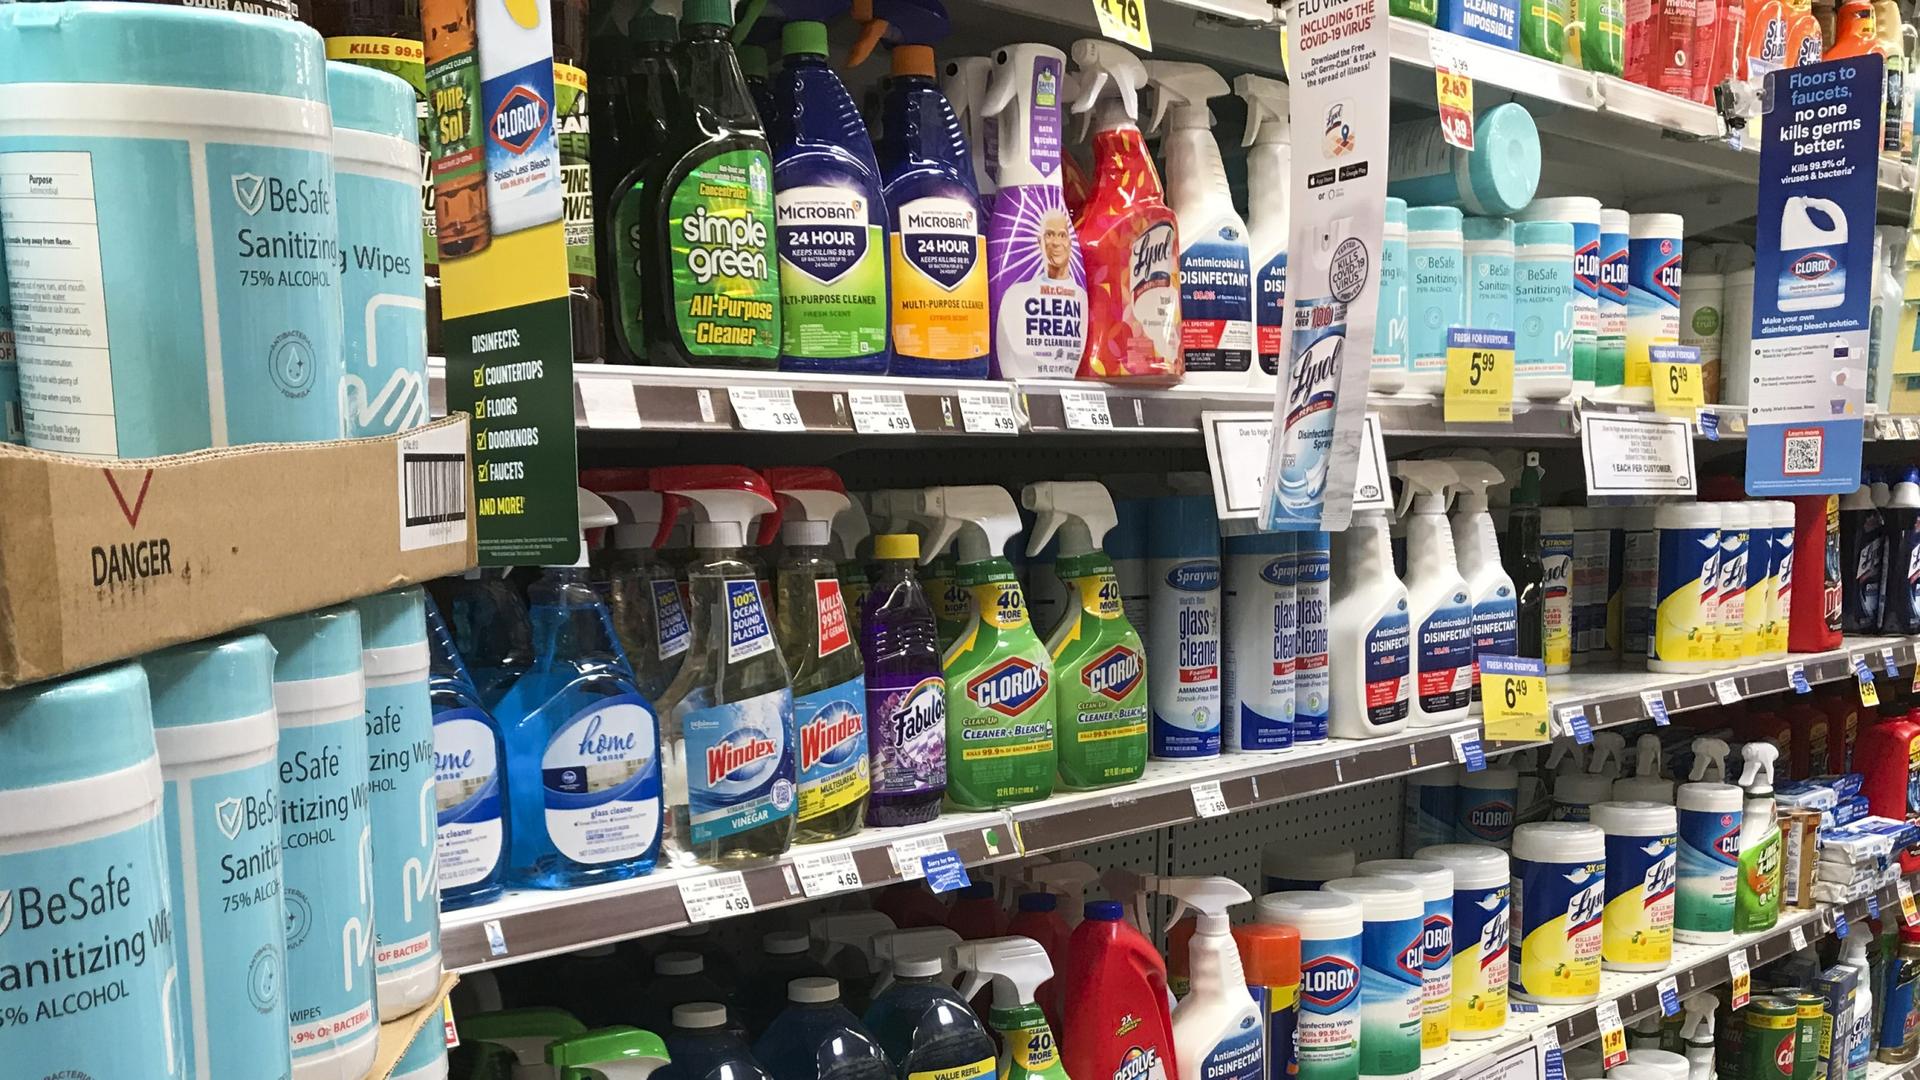 A grocery store aisle of cleaning and disinfecting products